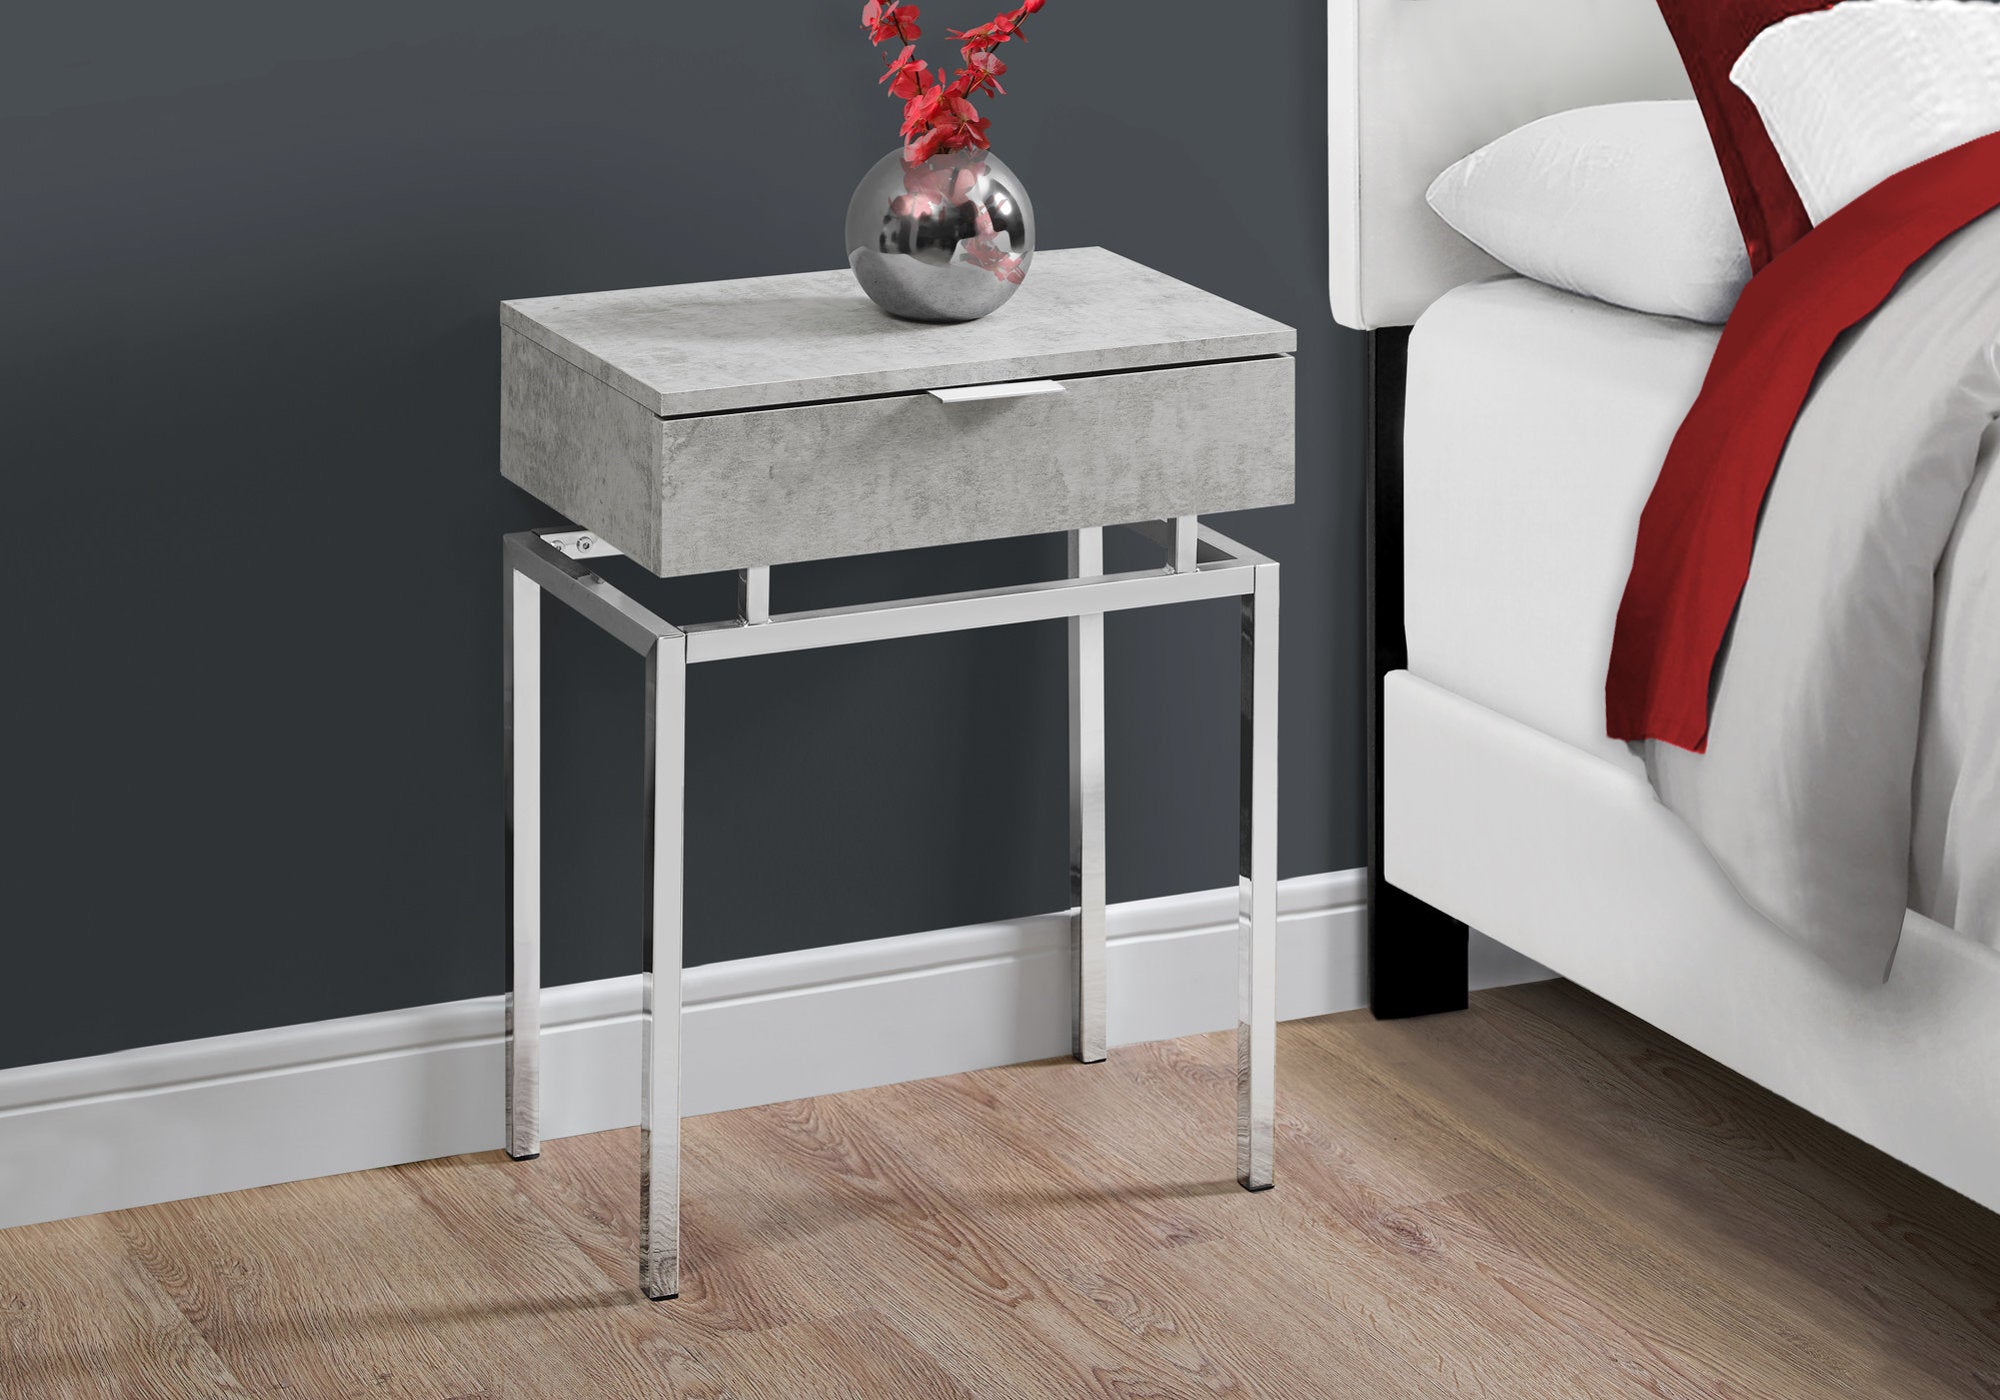 23" Silver And Gray End Table With Drawer